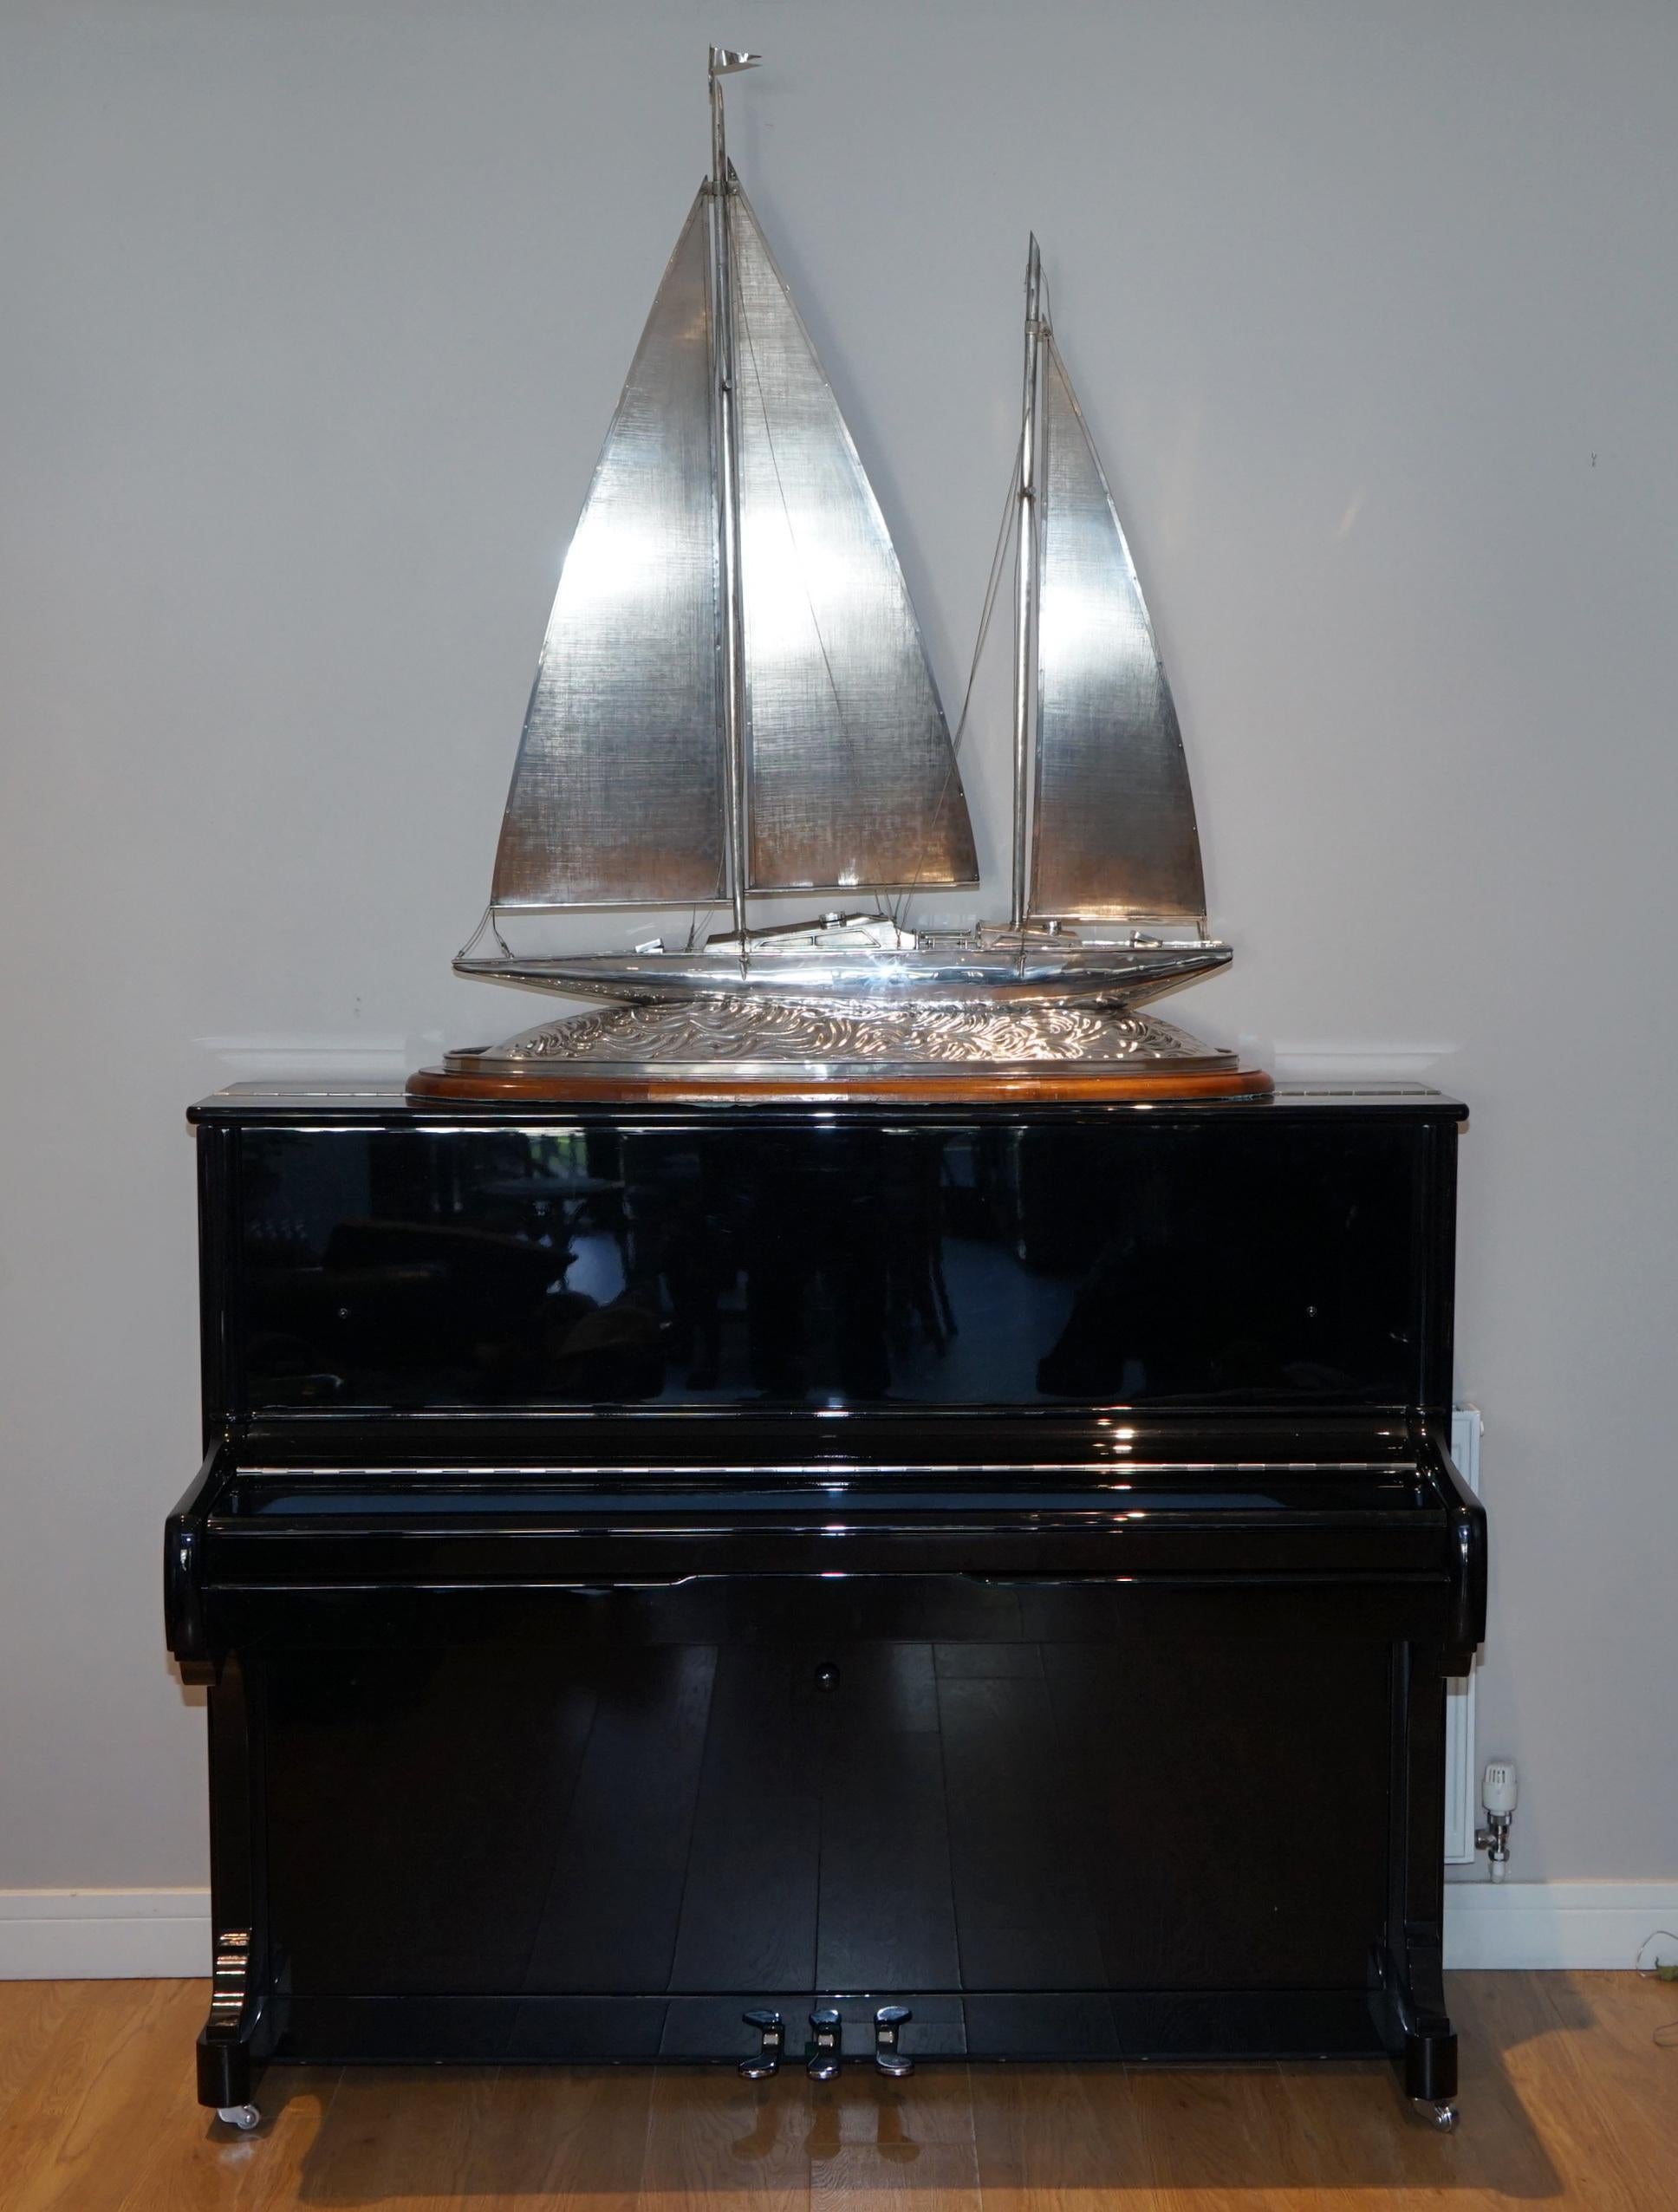 Wimbledon-Furniture

Wimbledon-Furniture is delighted to offer for sale Museum quality solid 925 Sterling Silver Tiffany & Co Exhibition Yacht fully hallmarked with London Import marks for 1977 and imported by the International Bullion & Metal